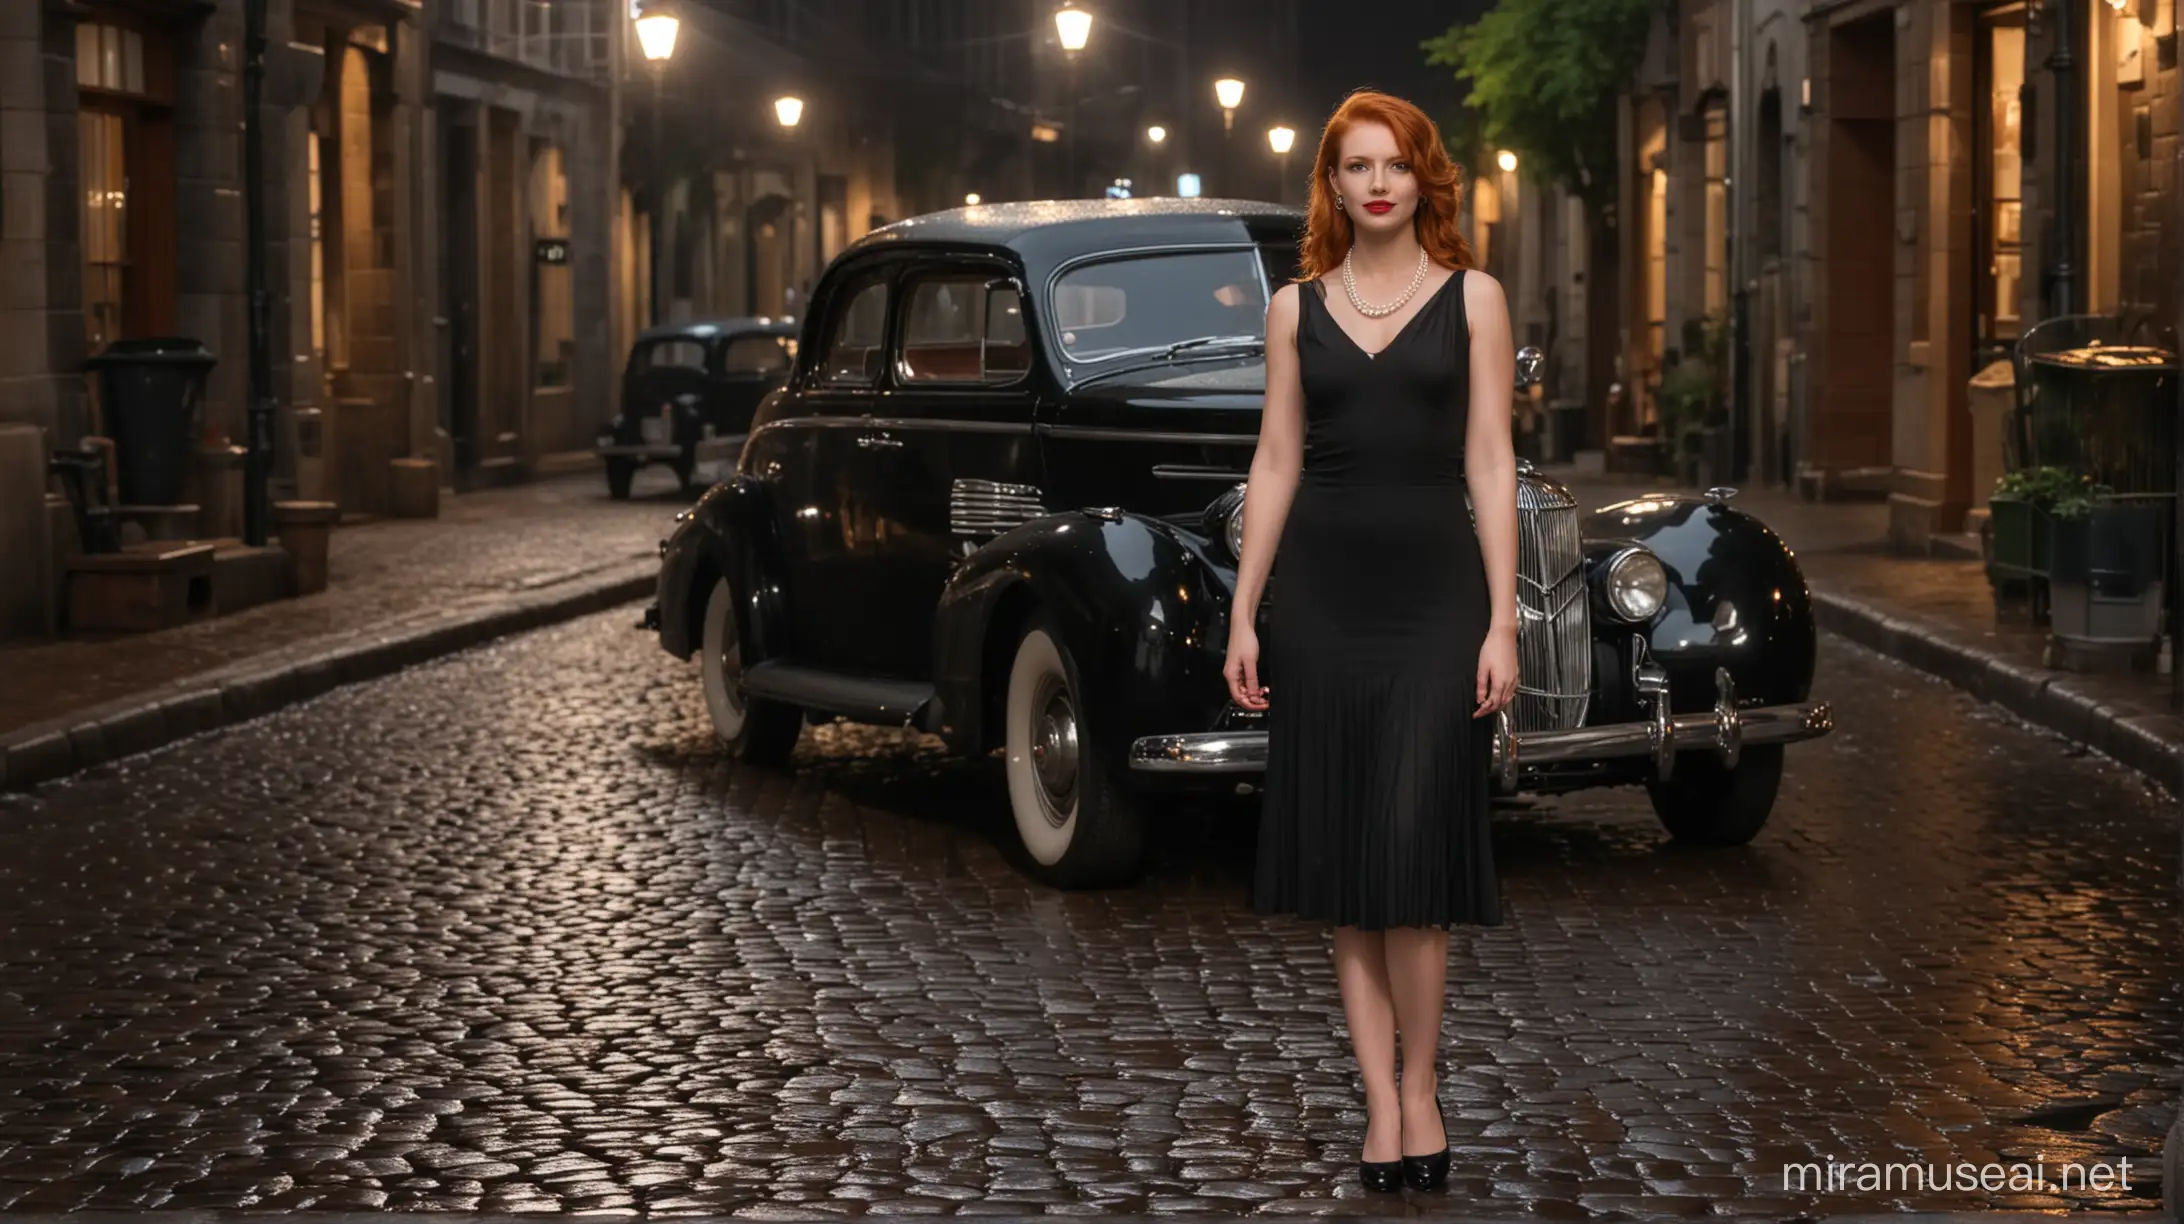 A beautiful redhead woman in a black dress and a pearl necklace standing next to a 1940's era car on a wet cobblestone street at night